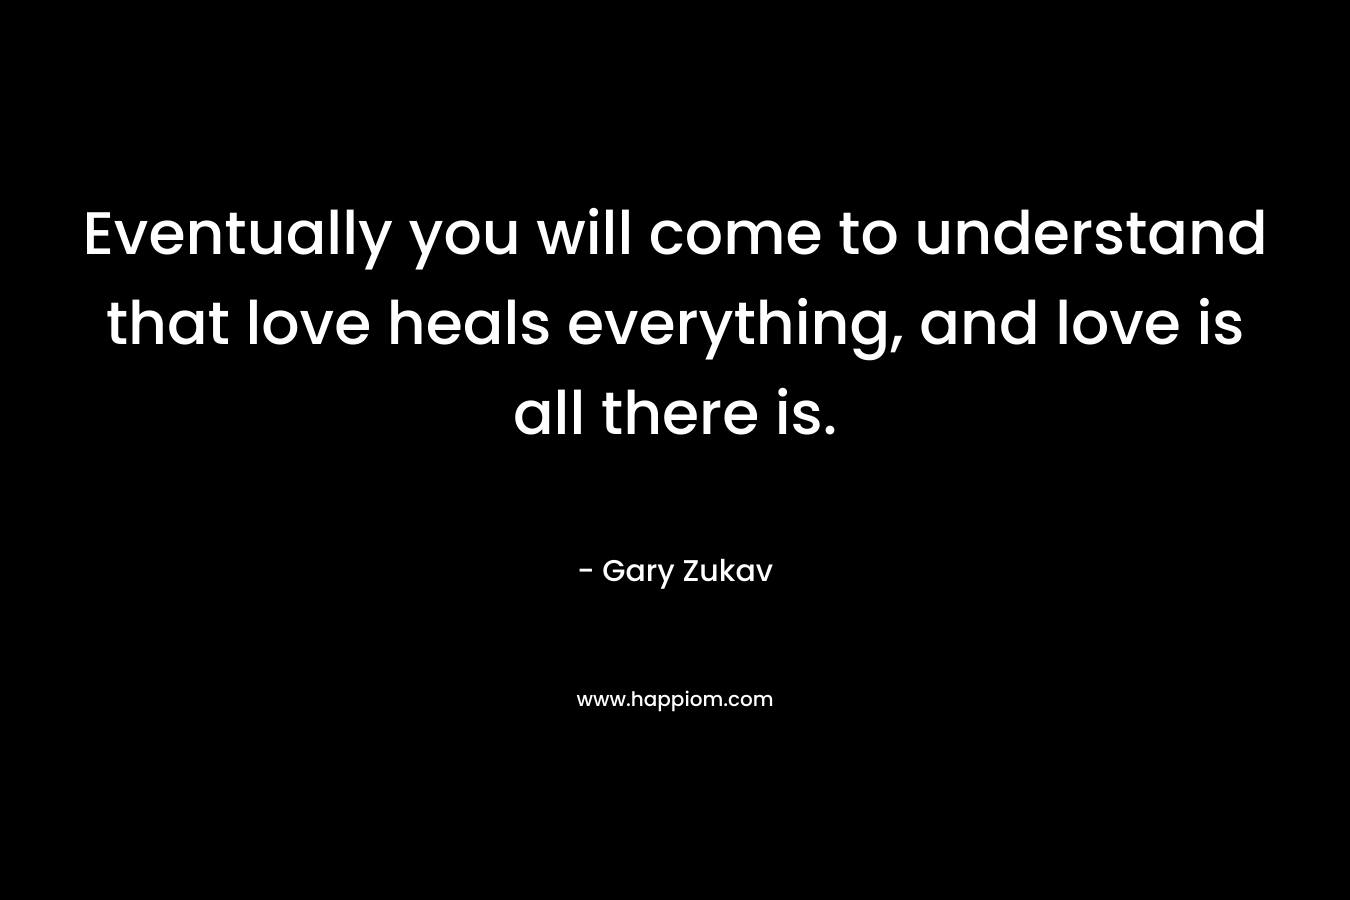 Eventually you will come to understand that love heals everything, and love is all there is. – Gary Zukav